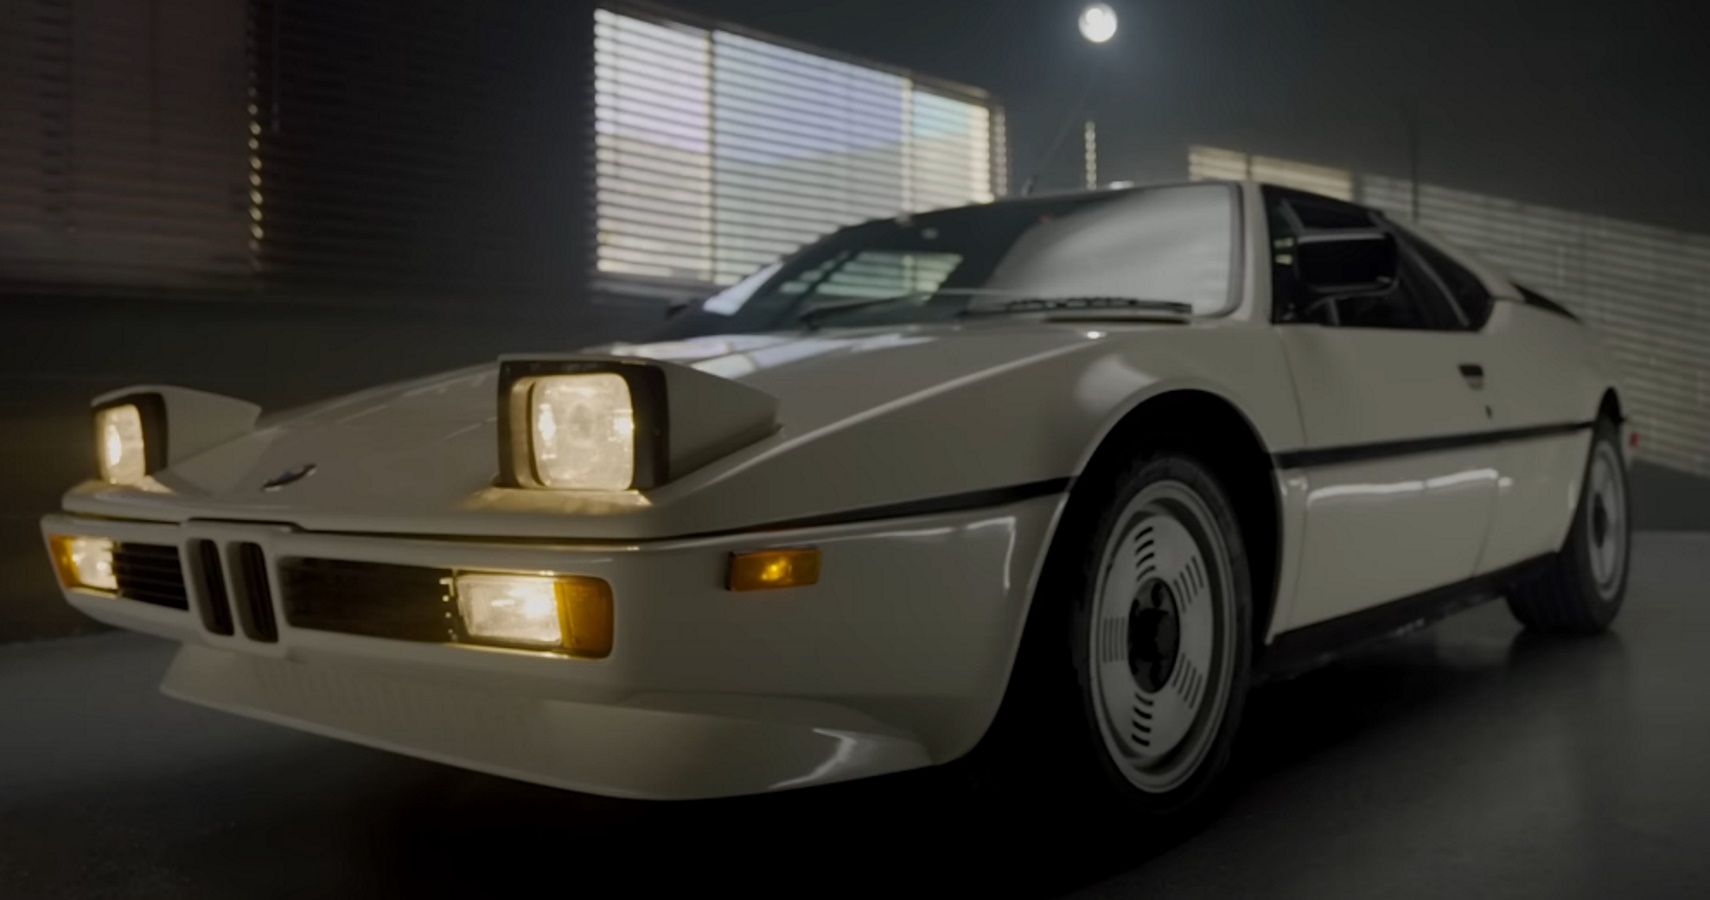 A BMW M1 in white with illuminated headlights